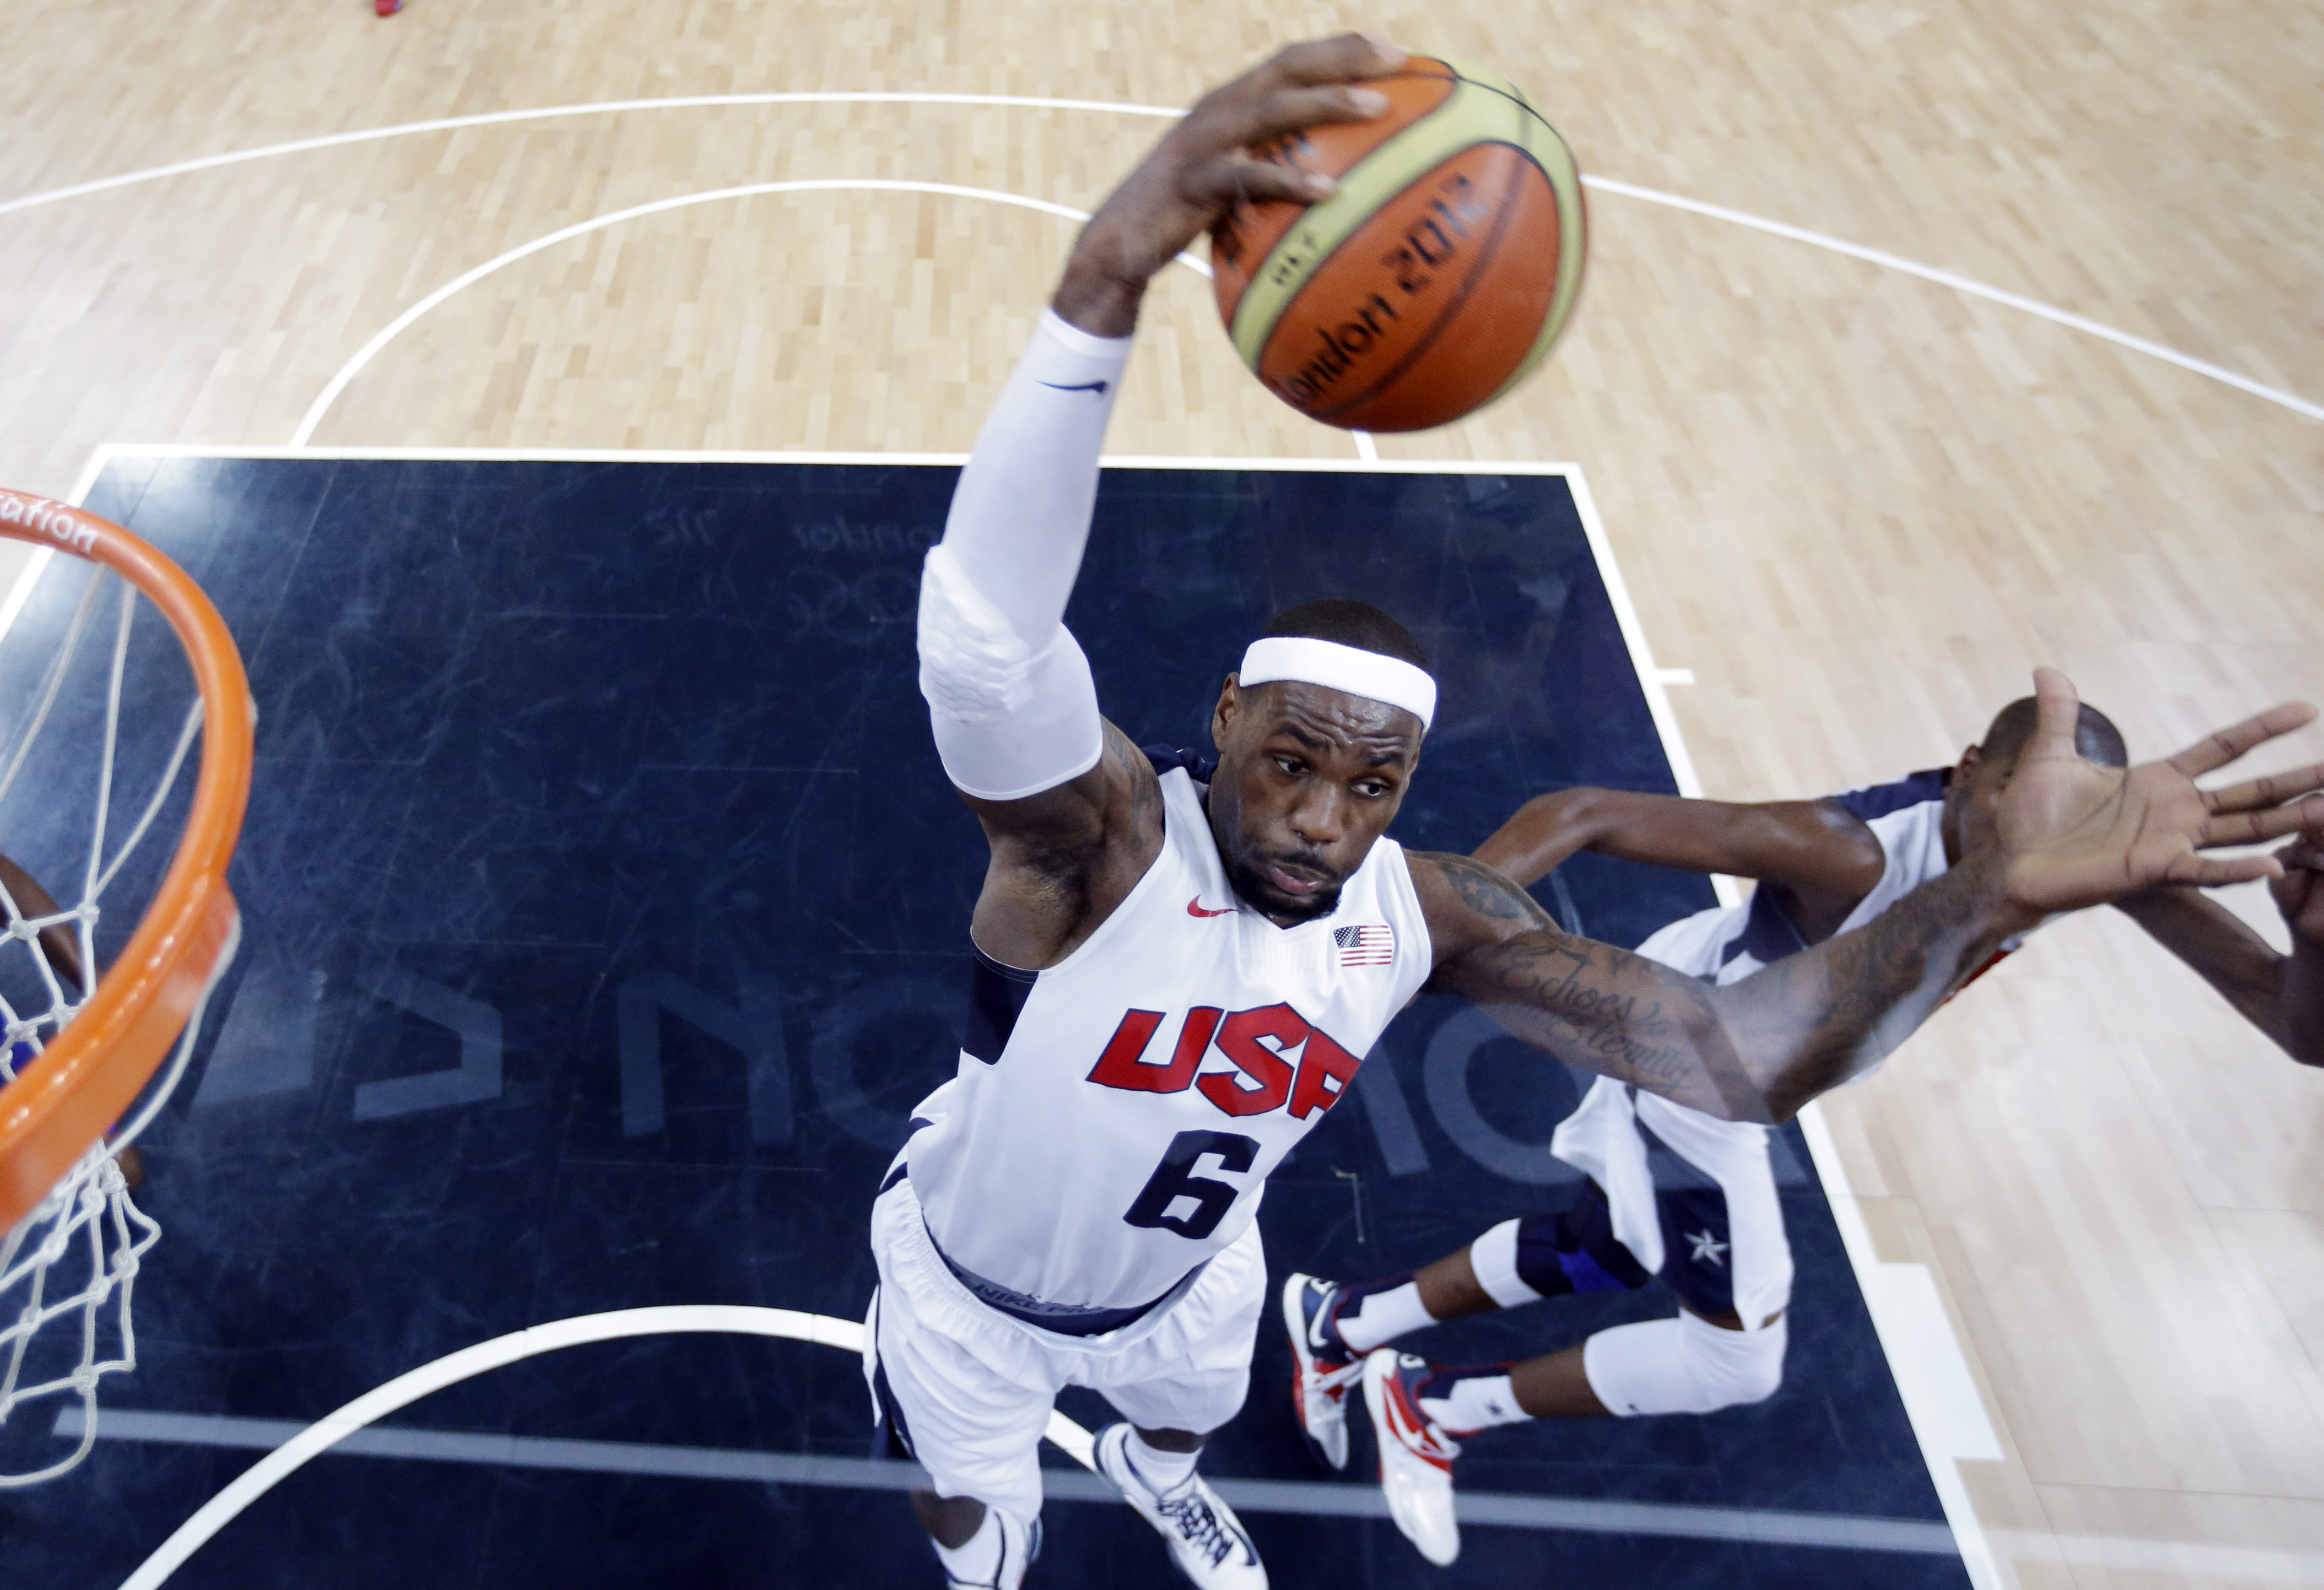 LeBron James recruiting for Team USA's 2024 Olympic roster